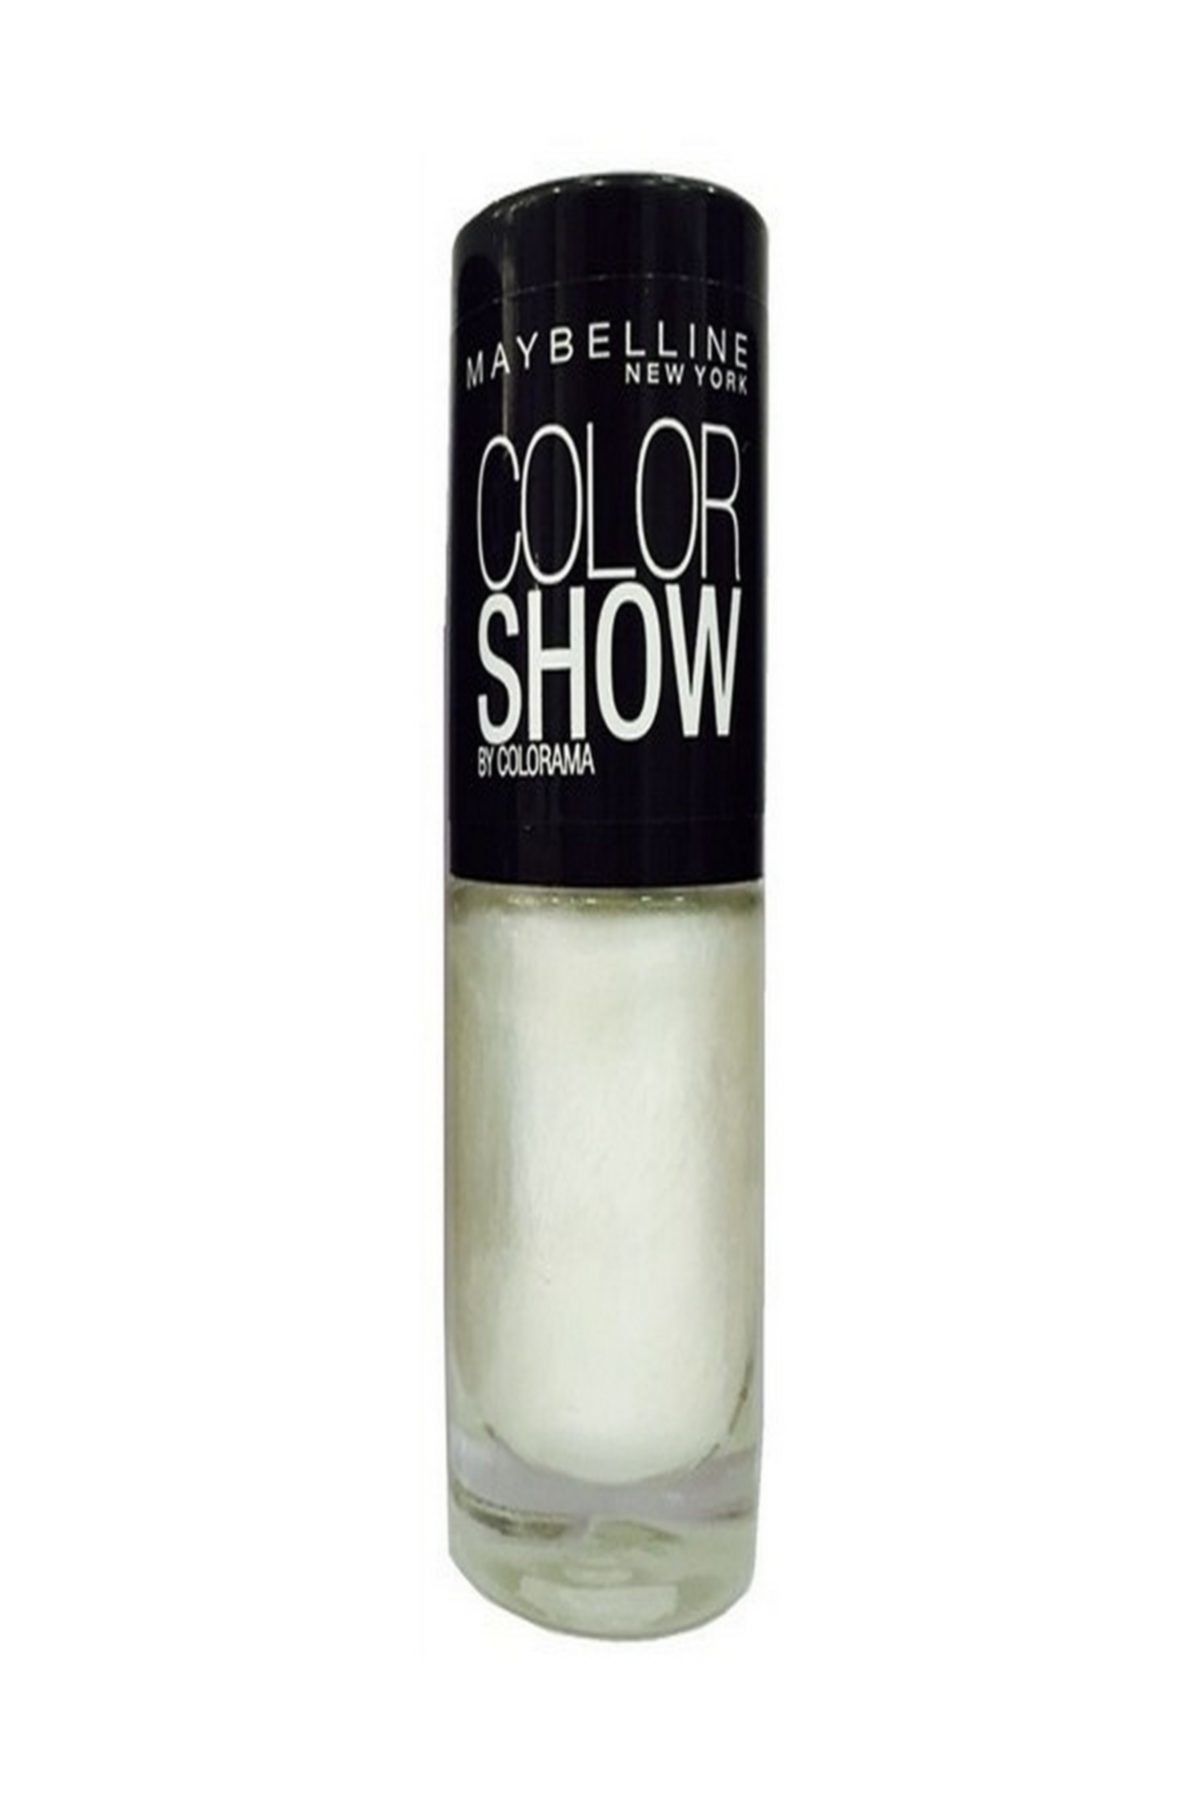 Maybelline New York Color Show Oje 7 Ml - 19 Marshmallow